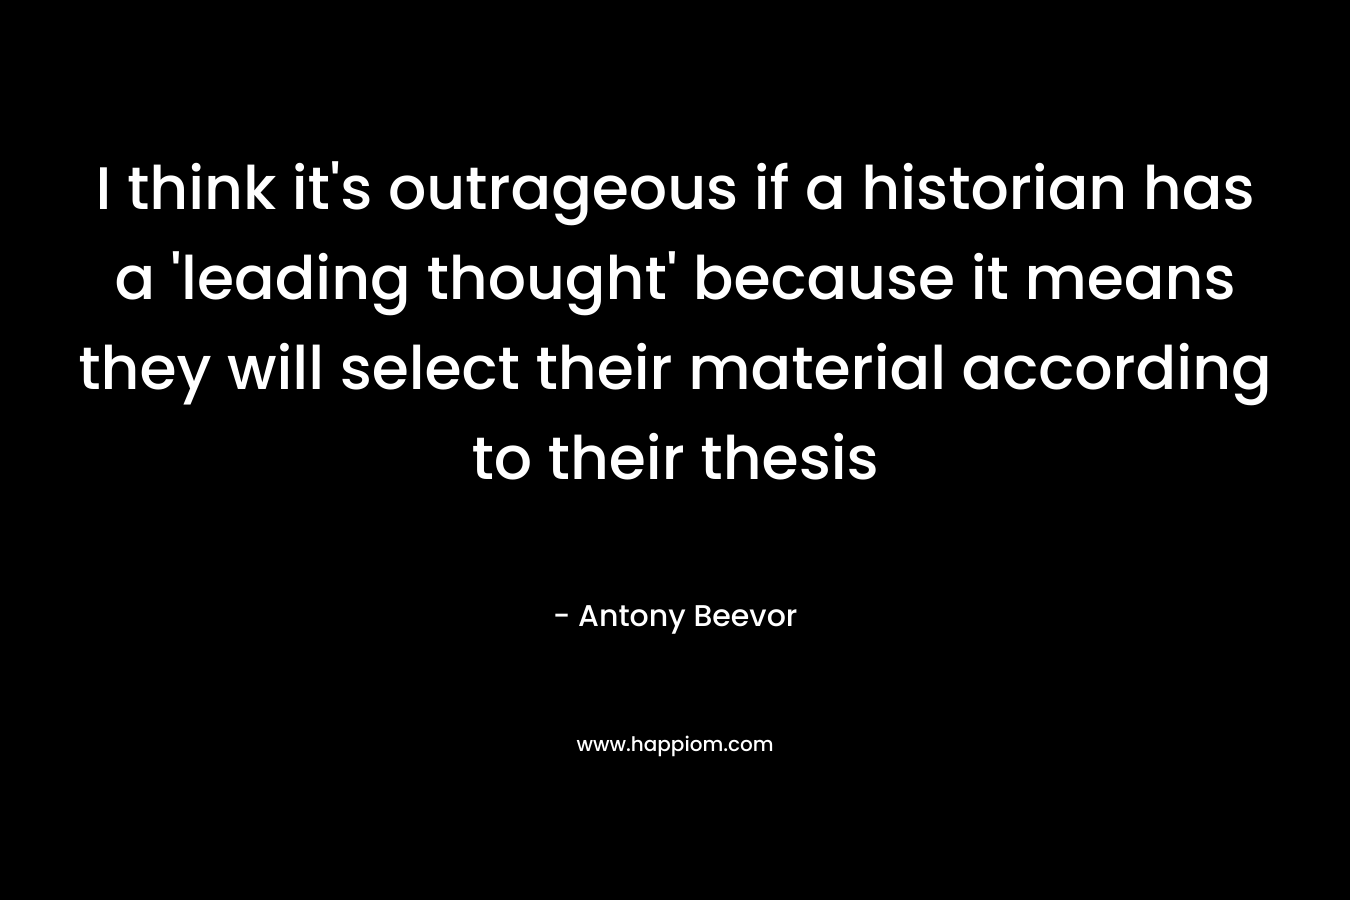 I think it's outrageous if a historian has a 'leading thought' because it means they will select their material according to their thesis